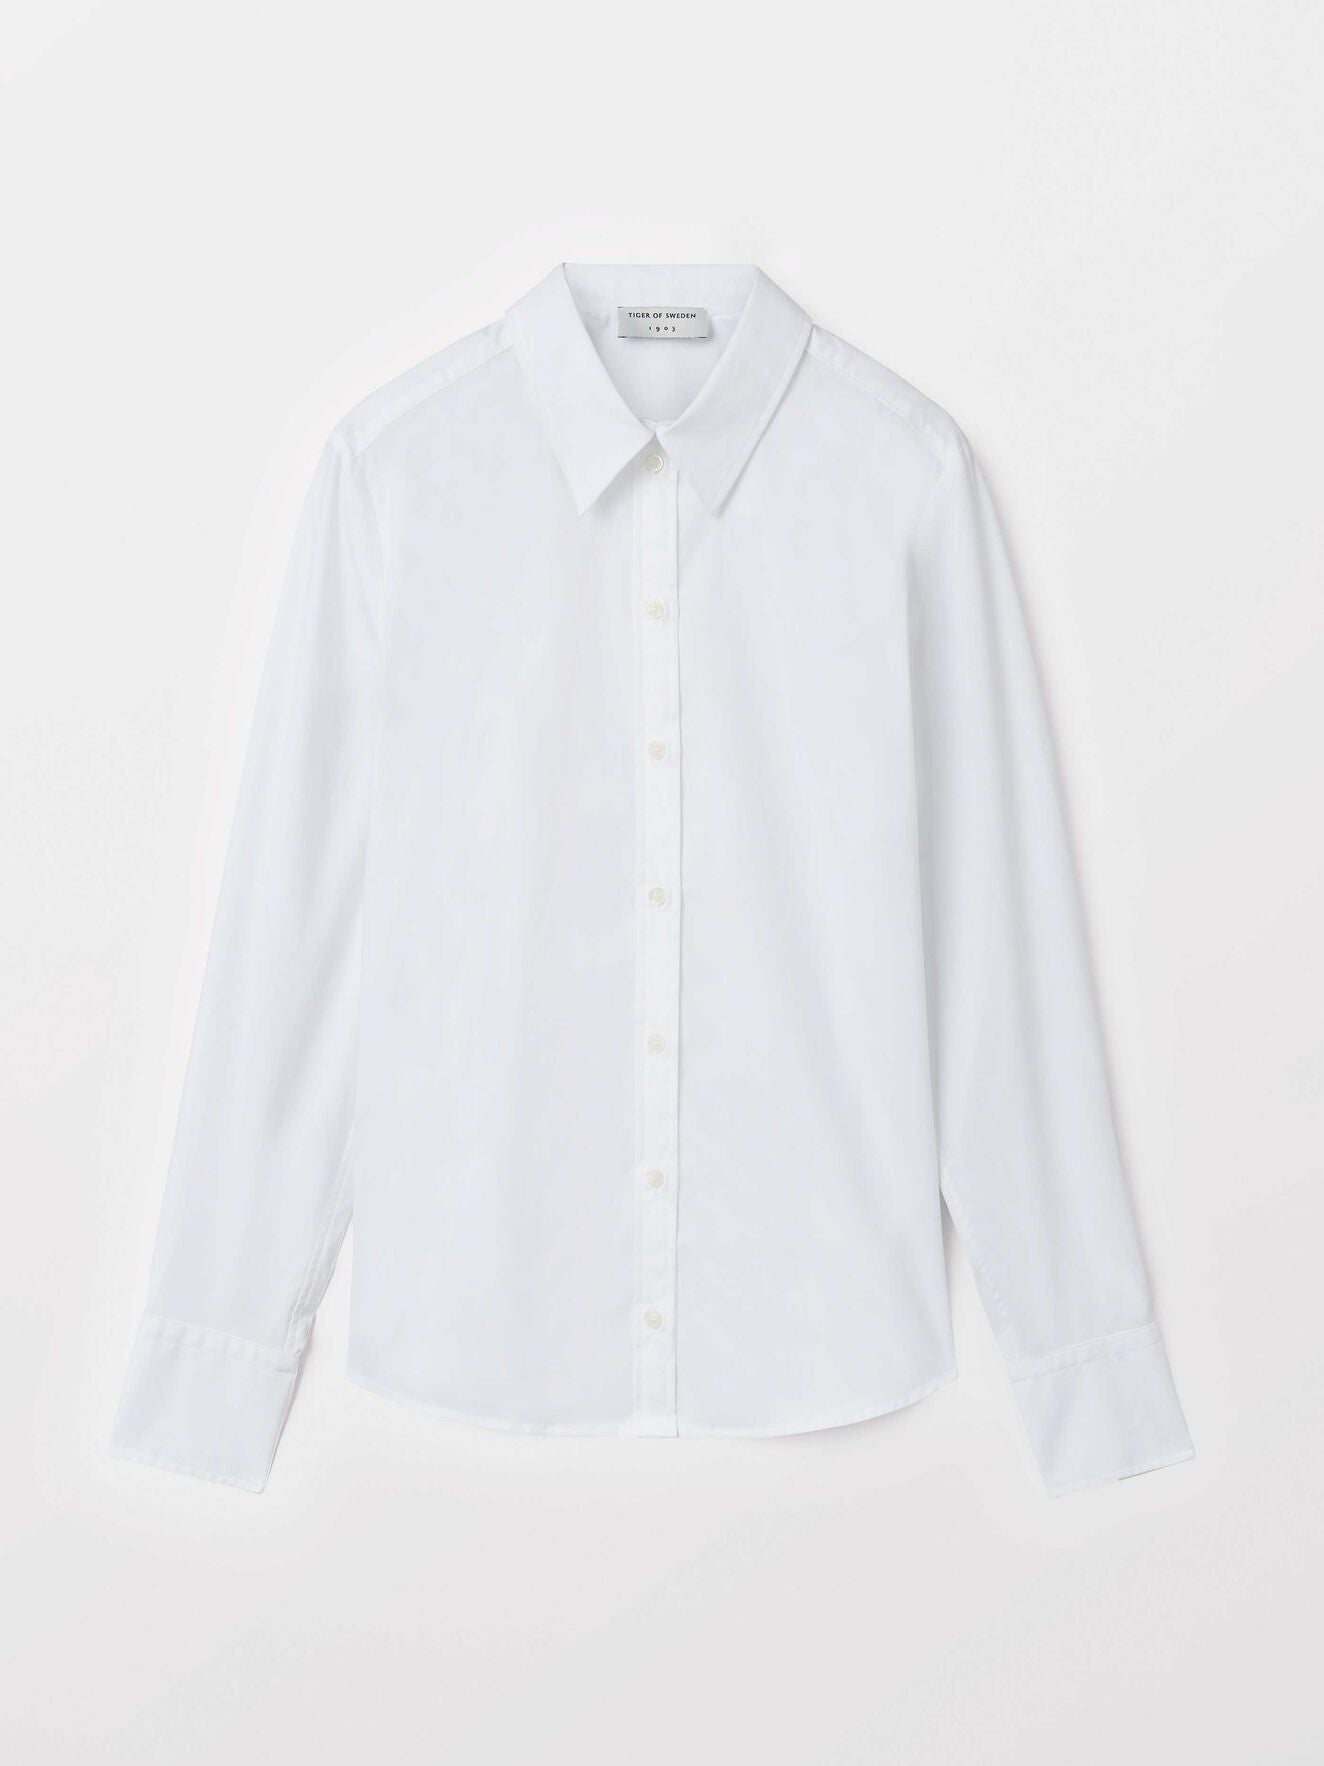 Tiger of Sweden Ame Shirt White - Mojo Independent Store